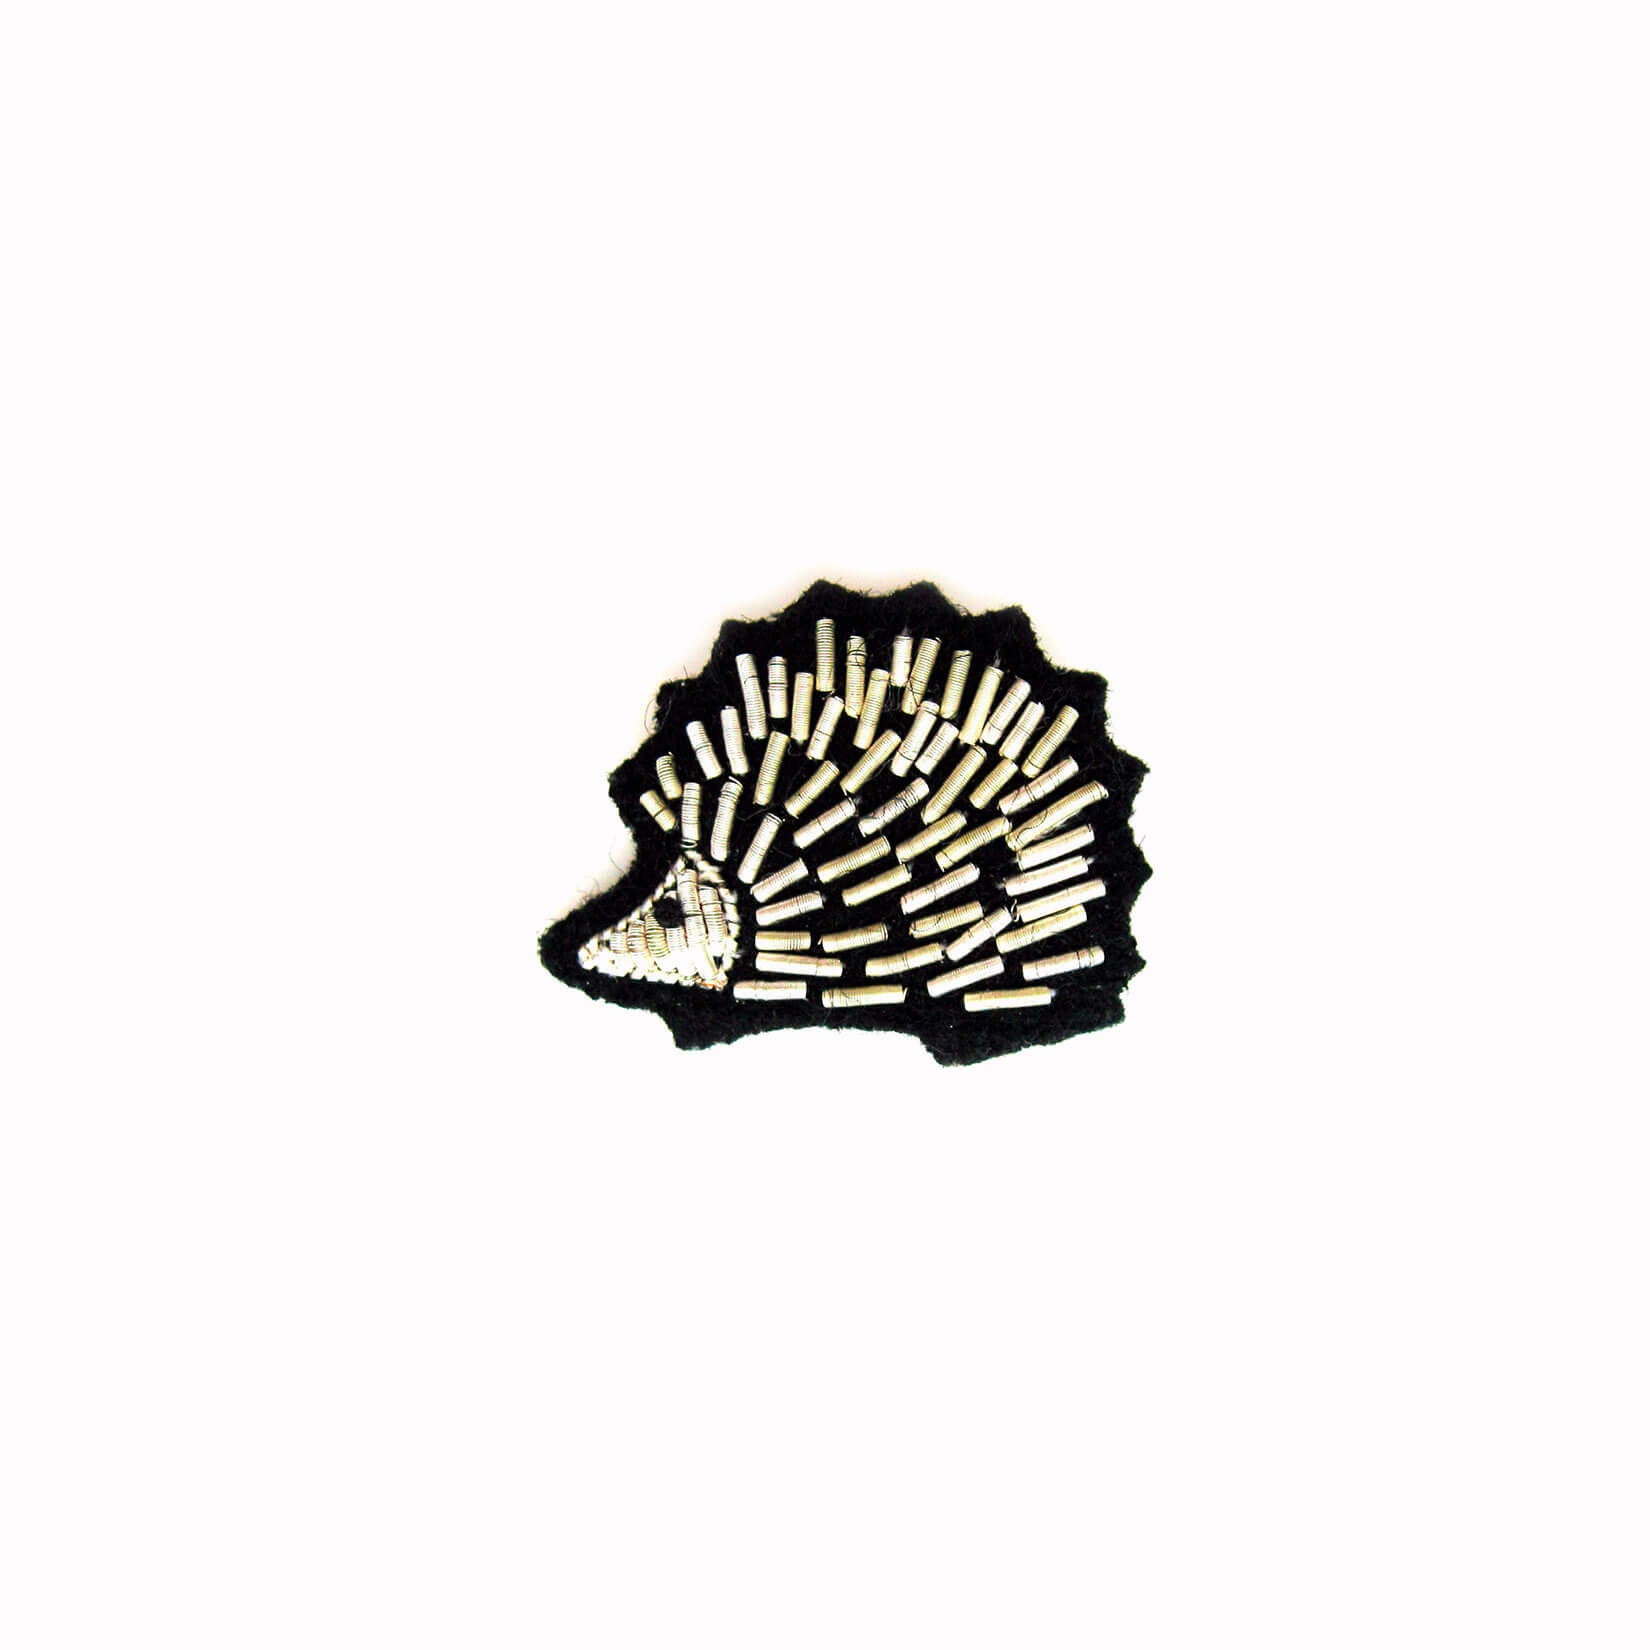 Adorable Shiny Hedgehog Hand Embroidered Lapel Badge, does not prickle, From Macon & Lesquoy, French Hand Embroidered badges and patches using Cannetille thread.